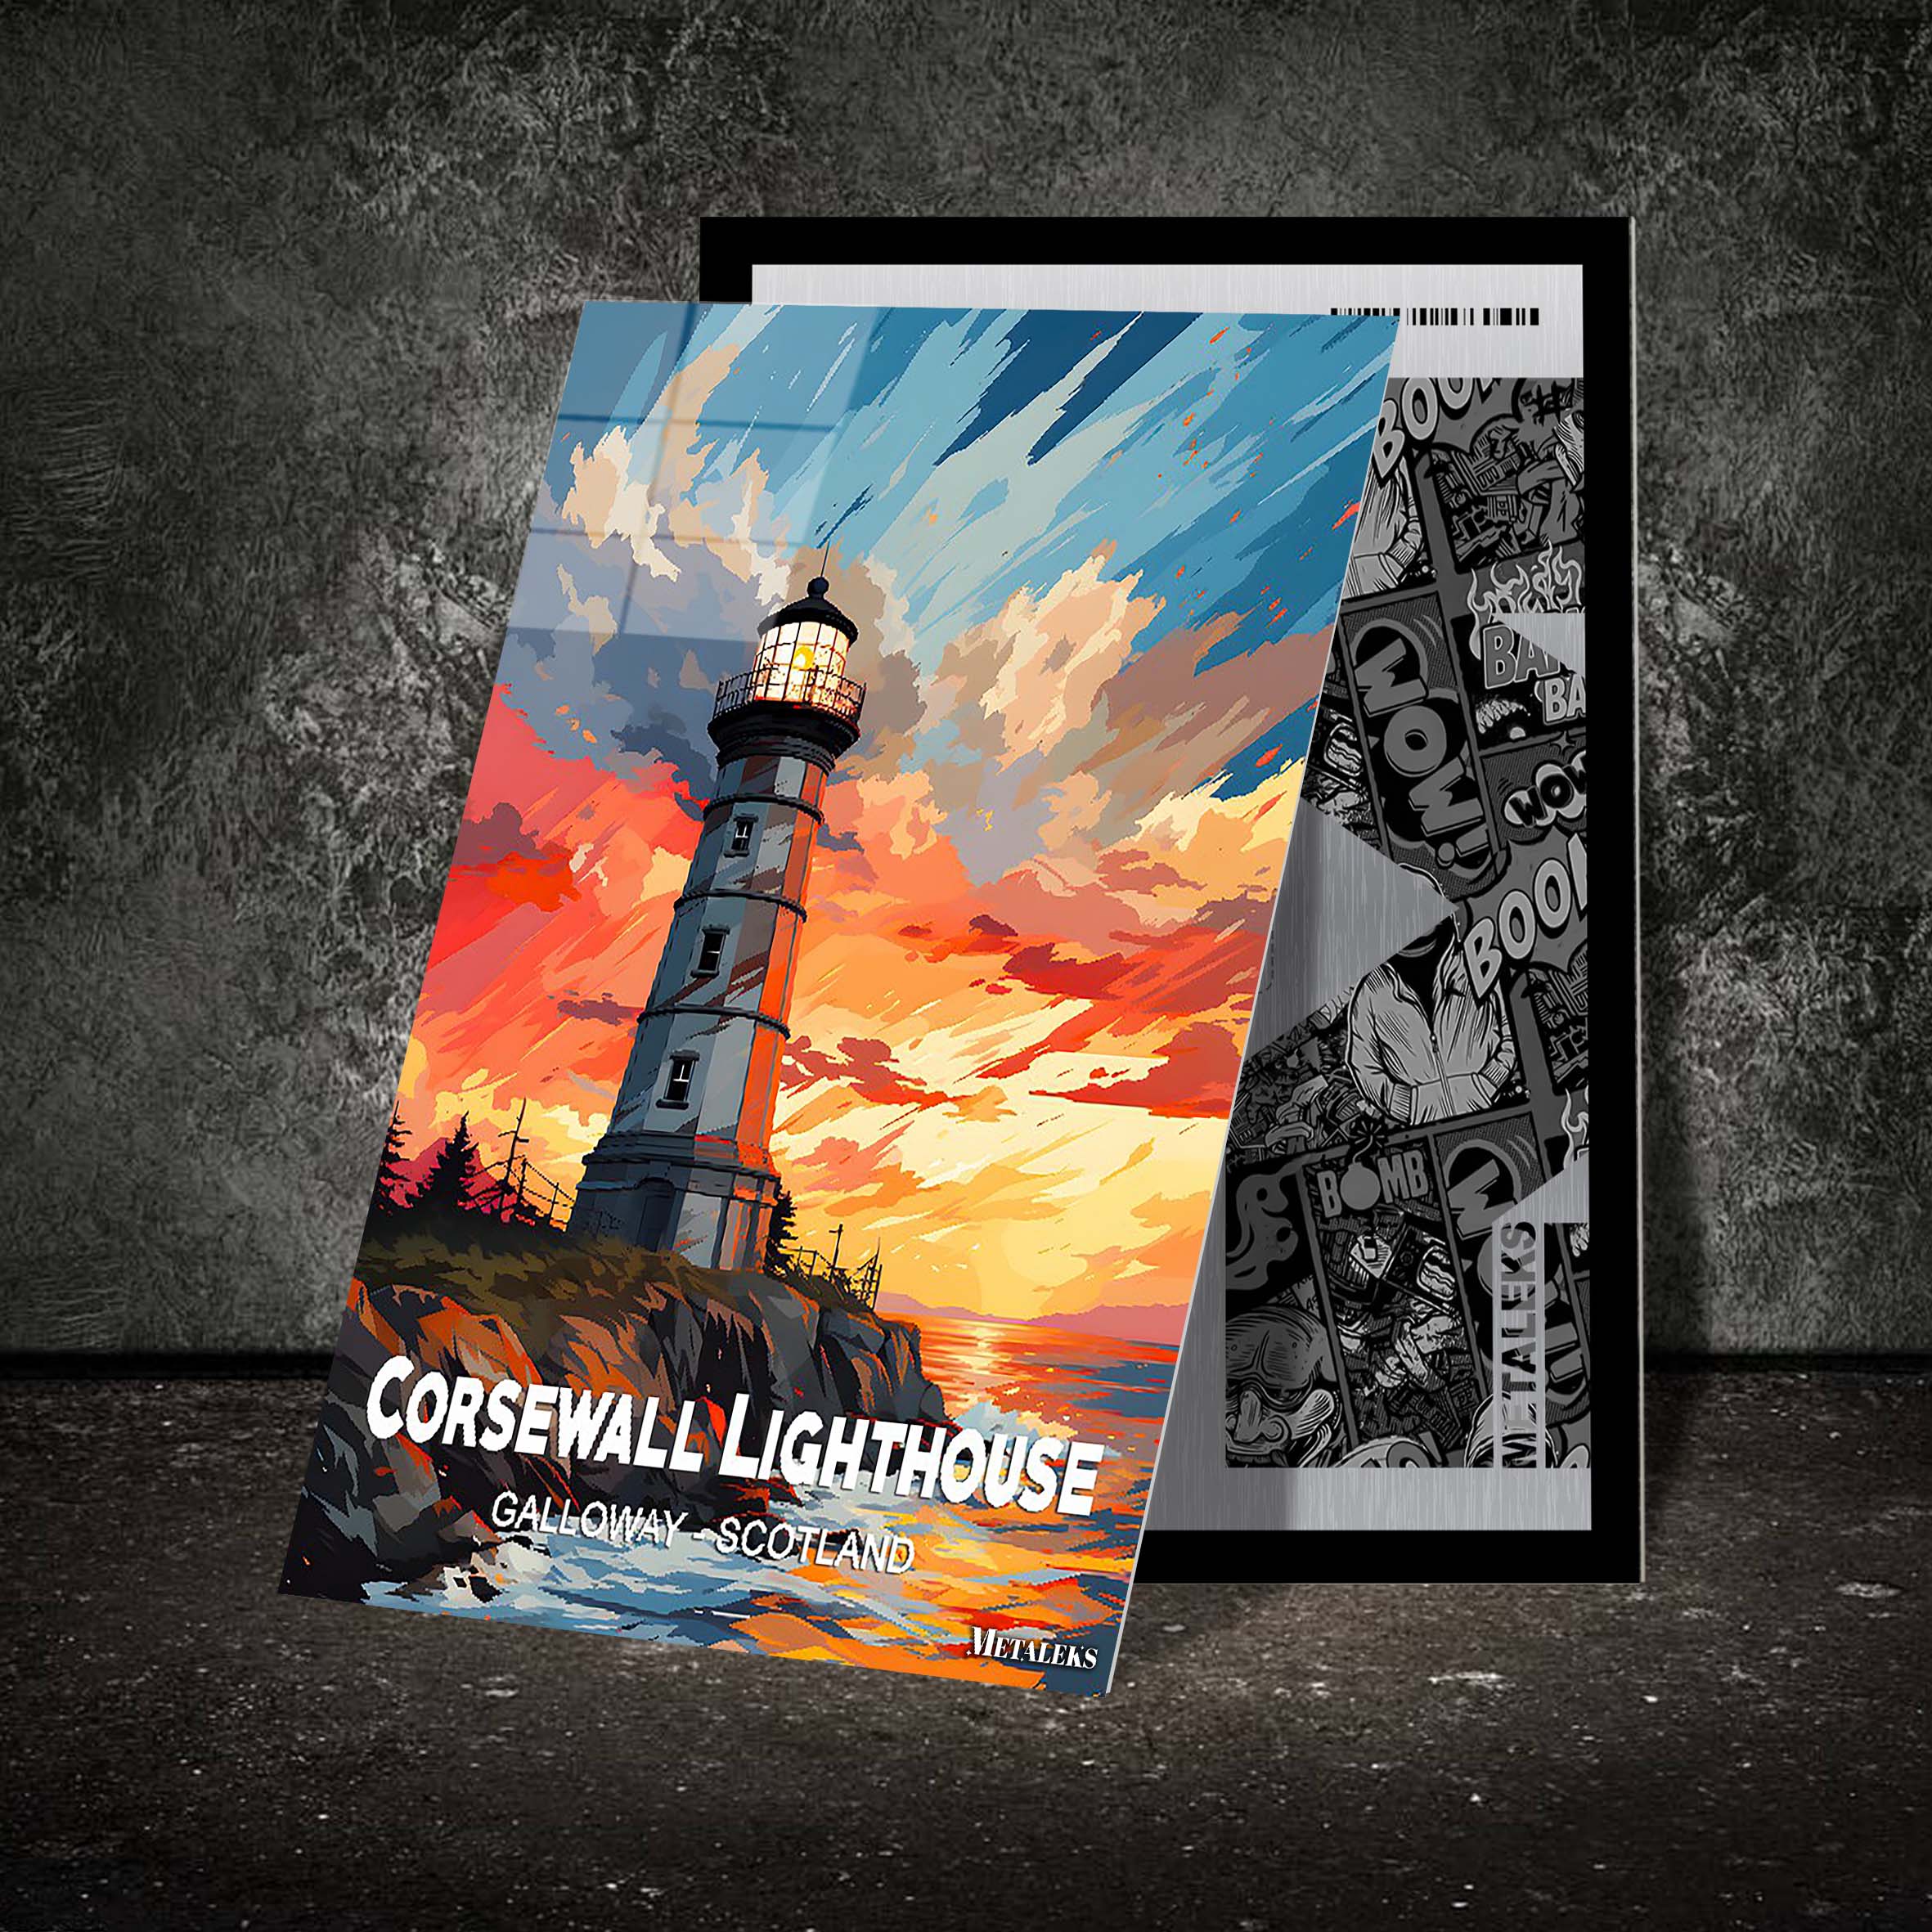 Scotland - Corsewall Lighthouse-designed by @Travel Poster AI